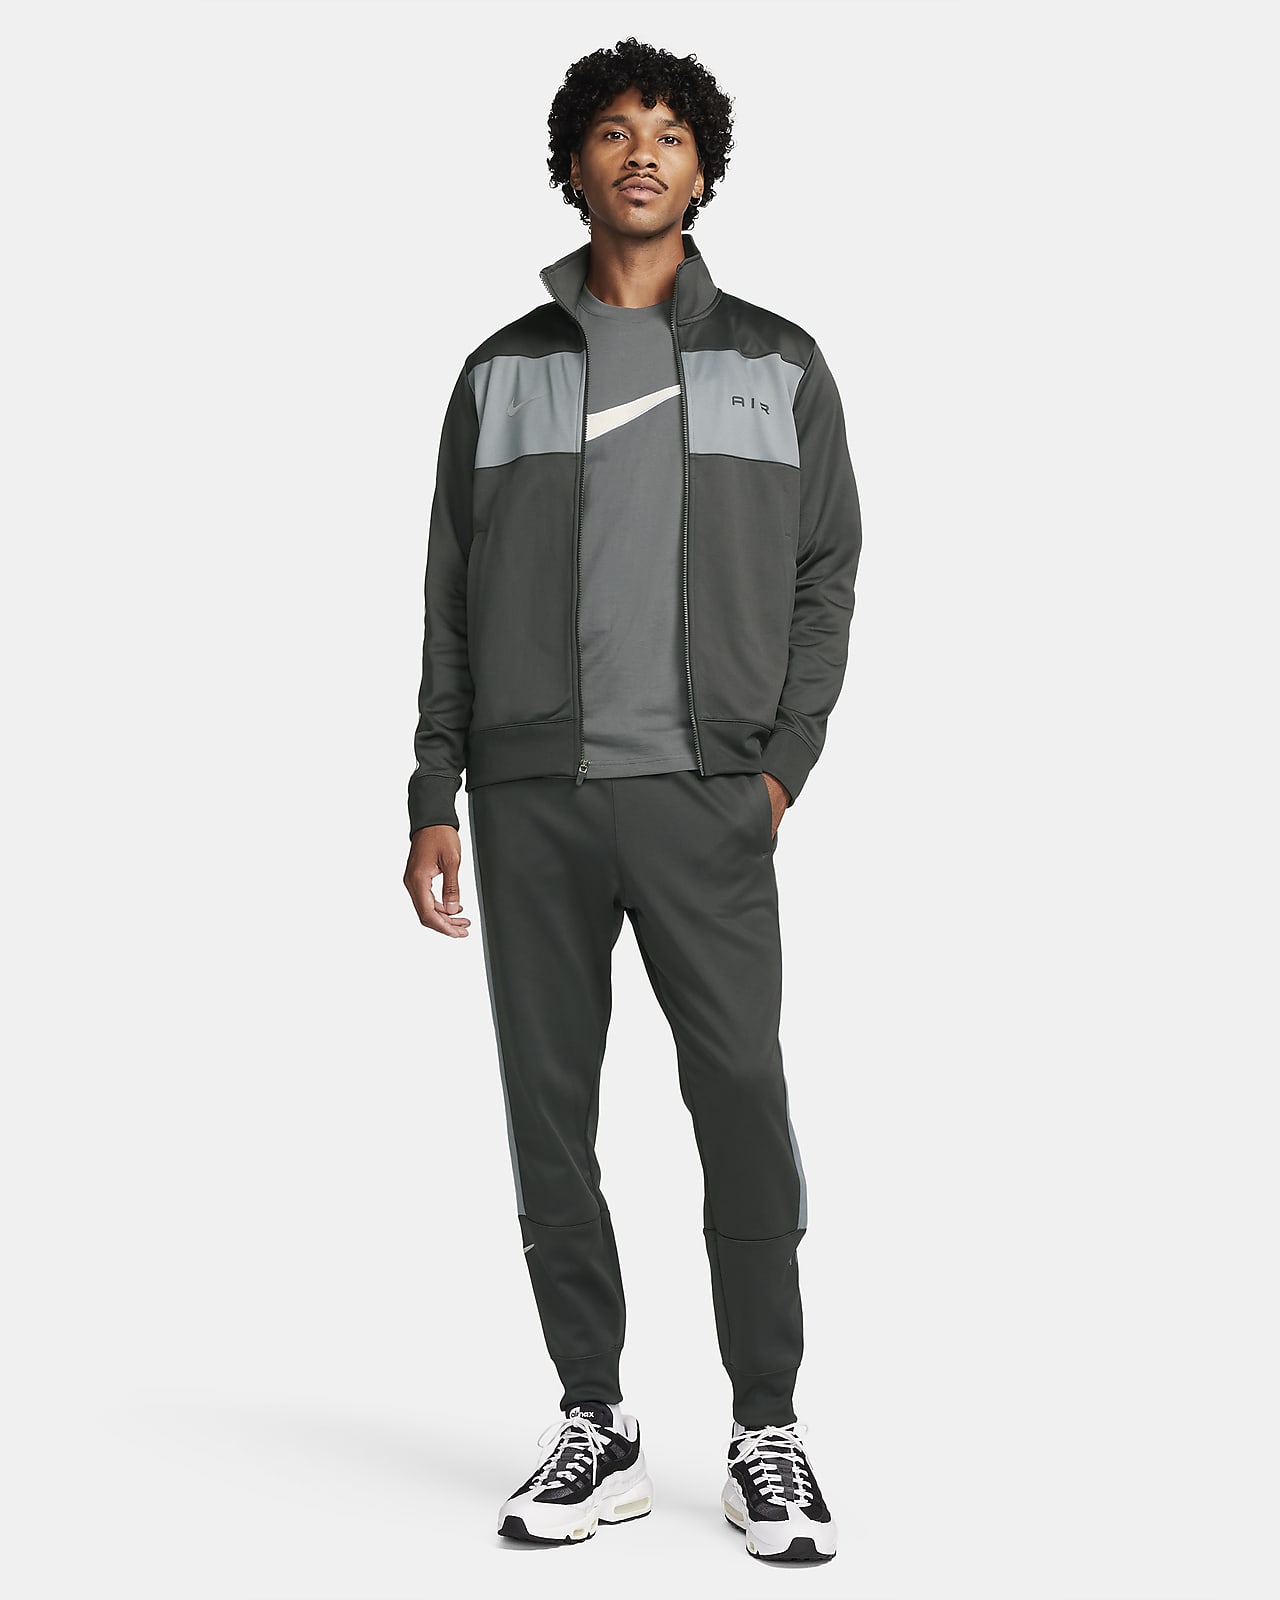 https://static.nike.com/a/images/t_PDP_1280_v1/f_auto,q_auto:eco/e82541d1-7a7e-472e-a2b7-fa5eeb6f428a/pantalon-de-jogging-air-pour-N9NRkb.png